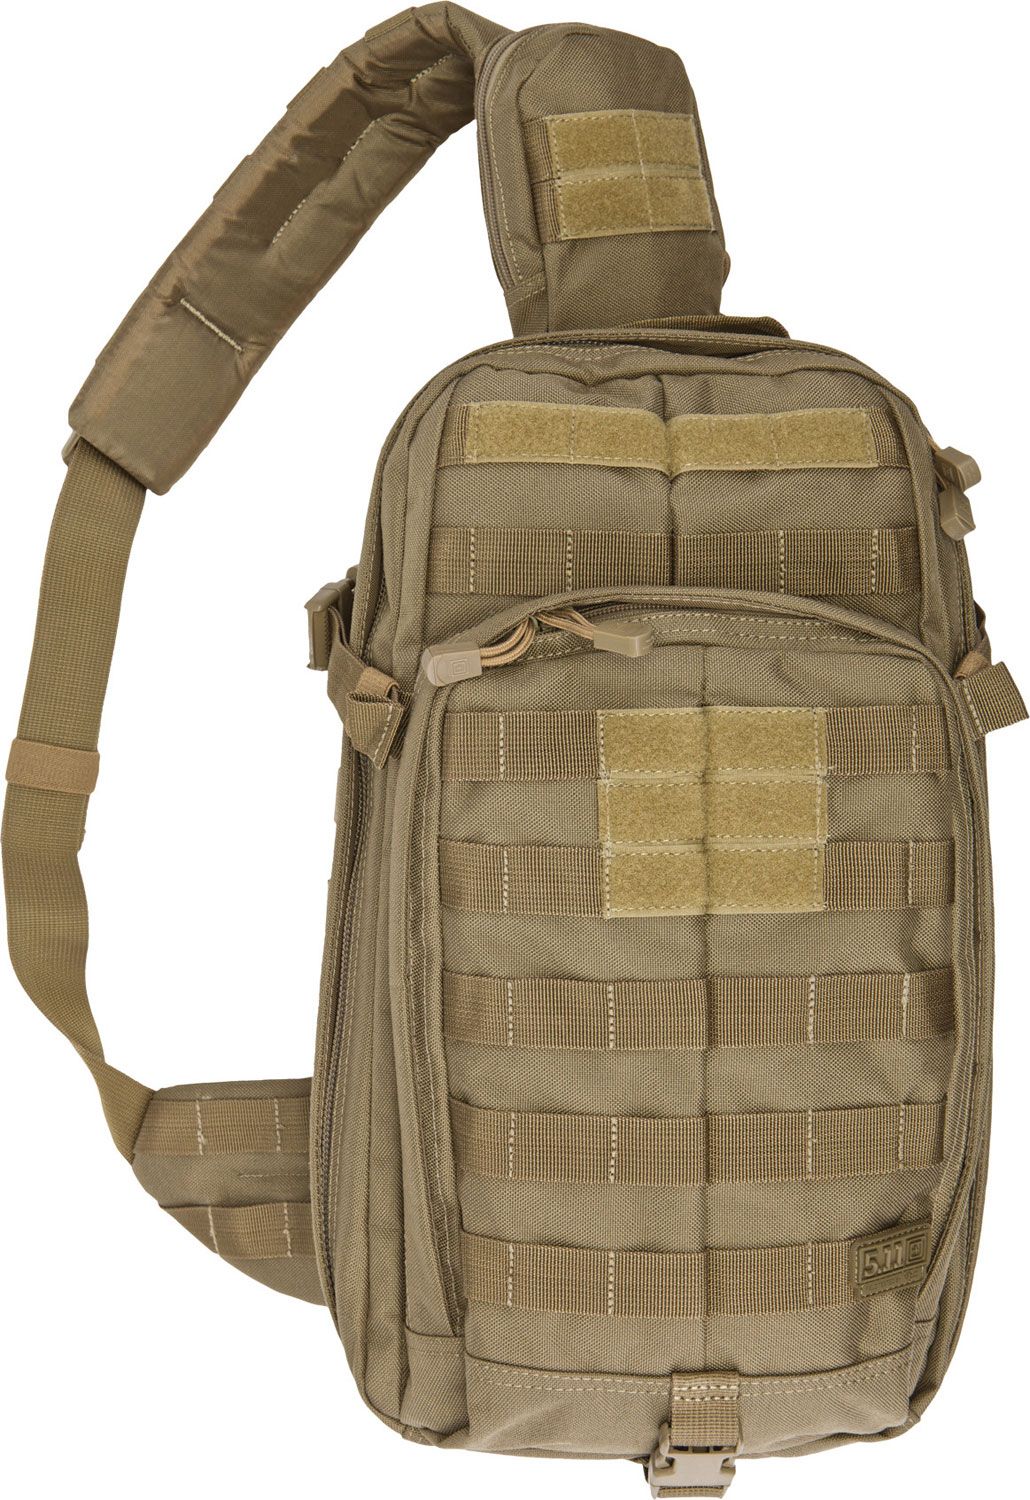 Details about   RUSH MOAB 10 Sling Pack Sandstone 